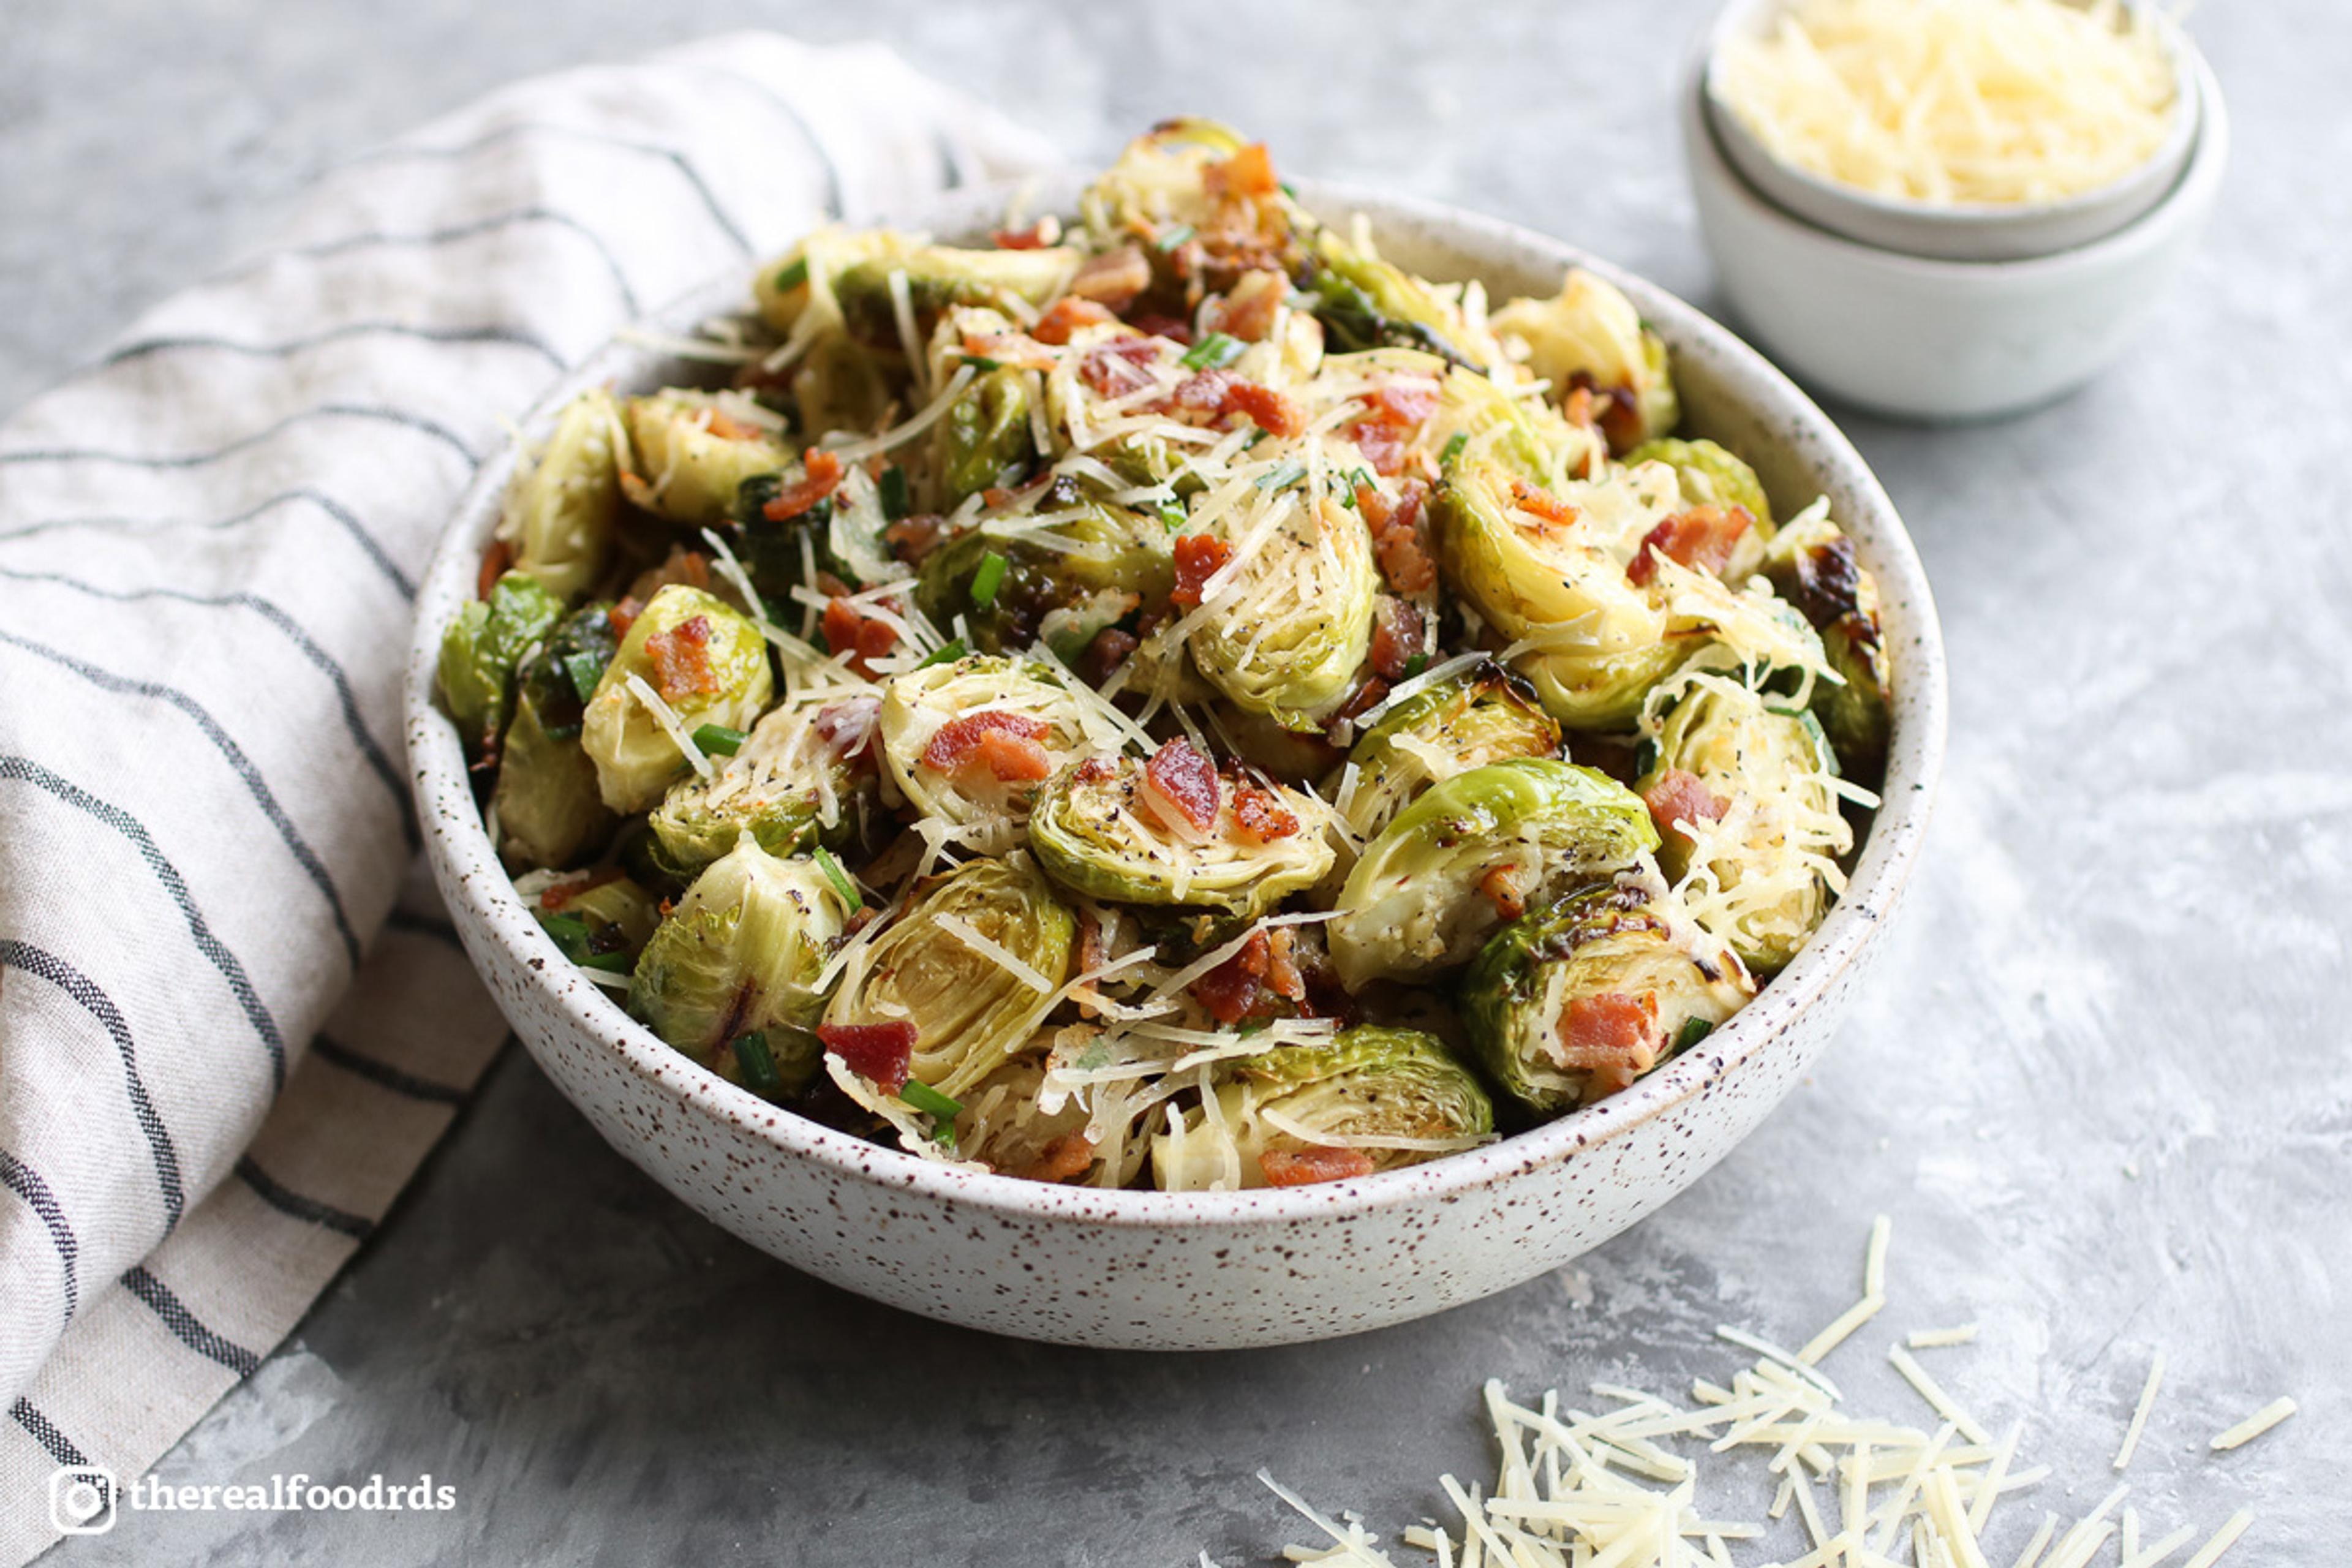 A bowl of roasted Brussels sprouts artfully garnished with shredded cheese and bacon crumbles.